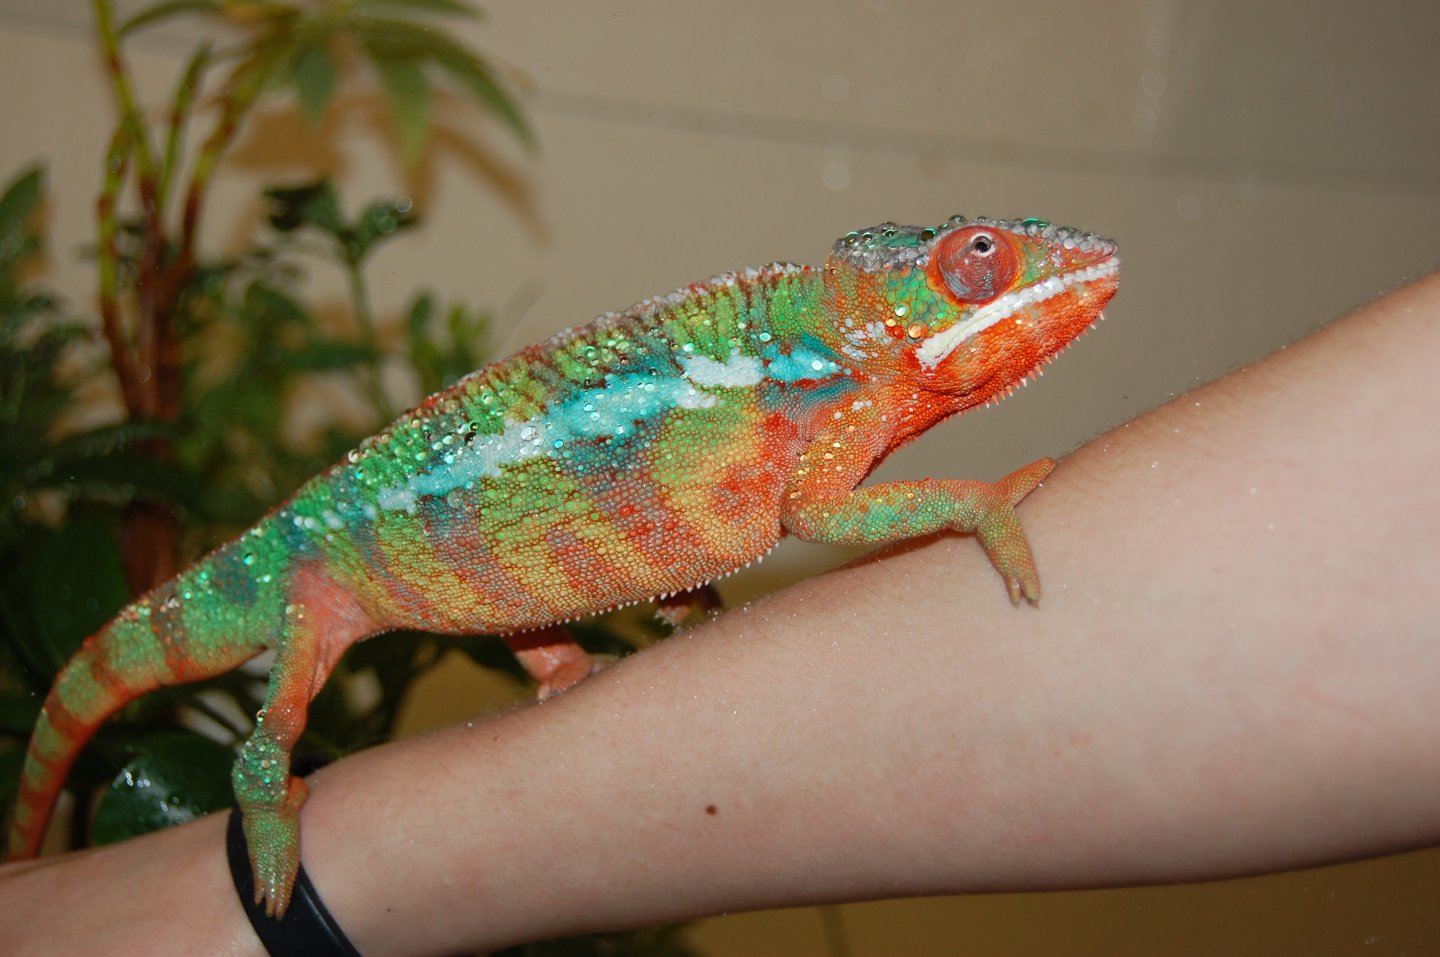 Skittles after his shower